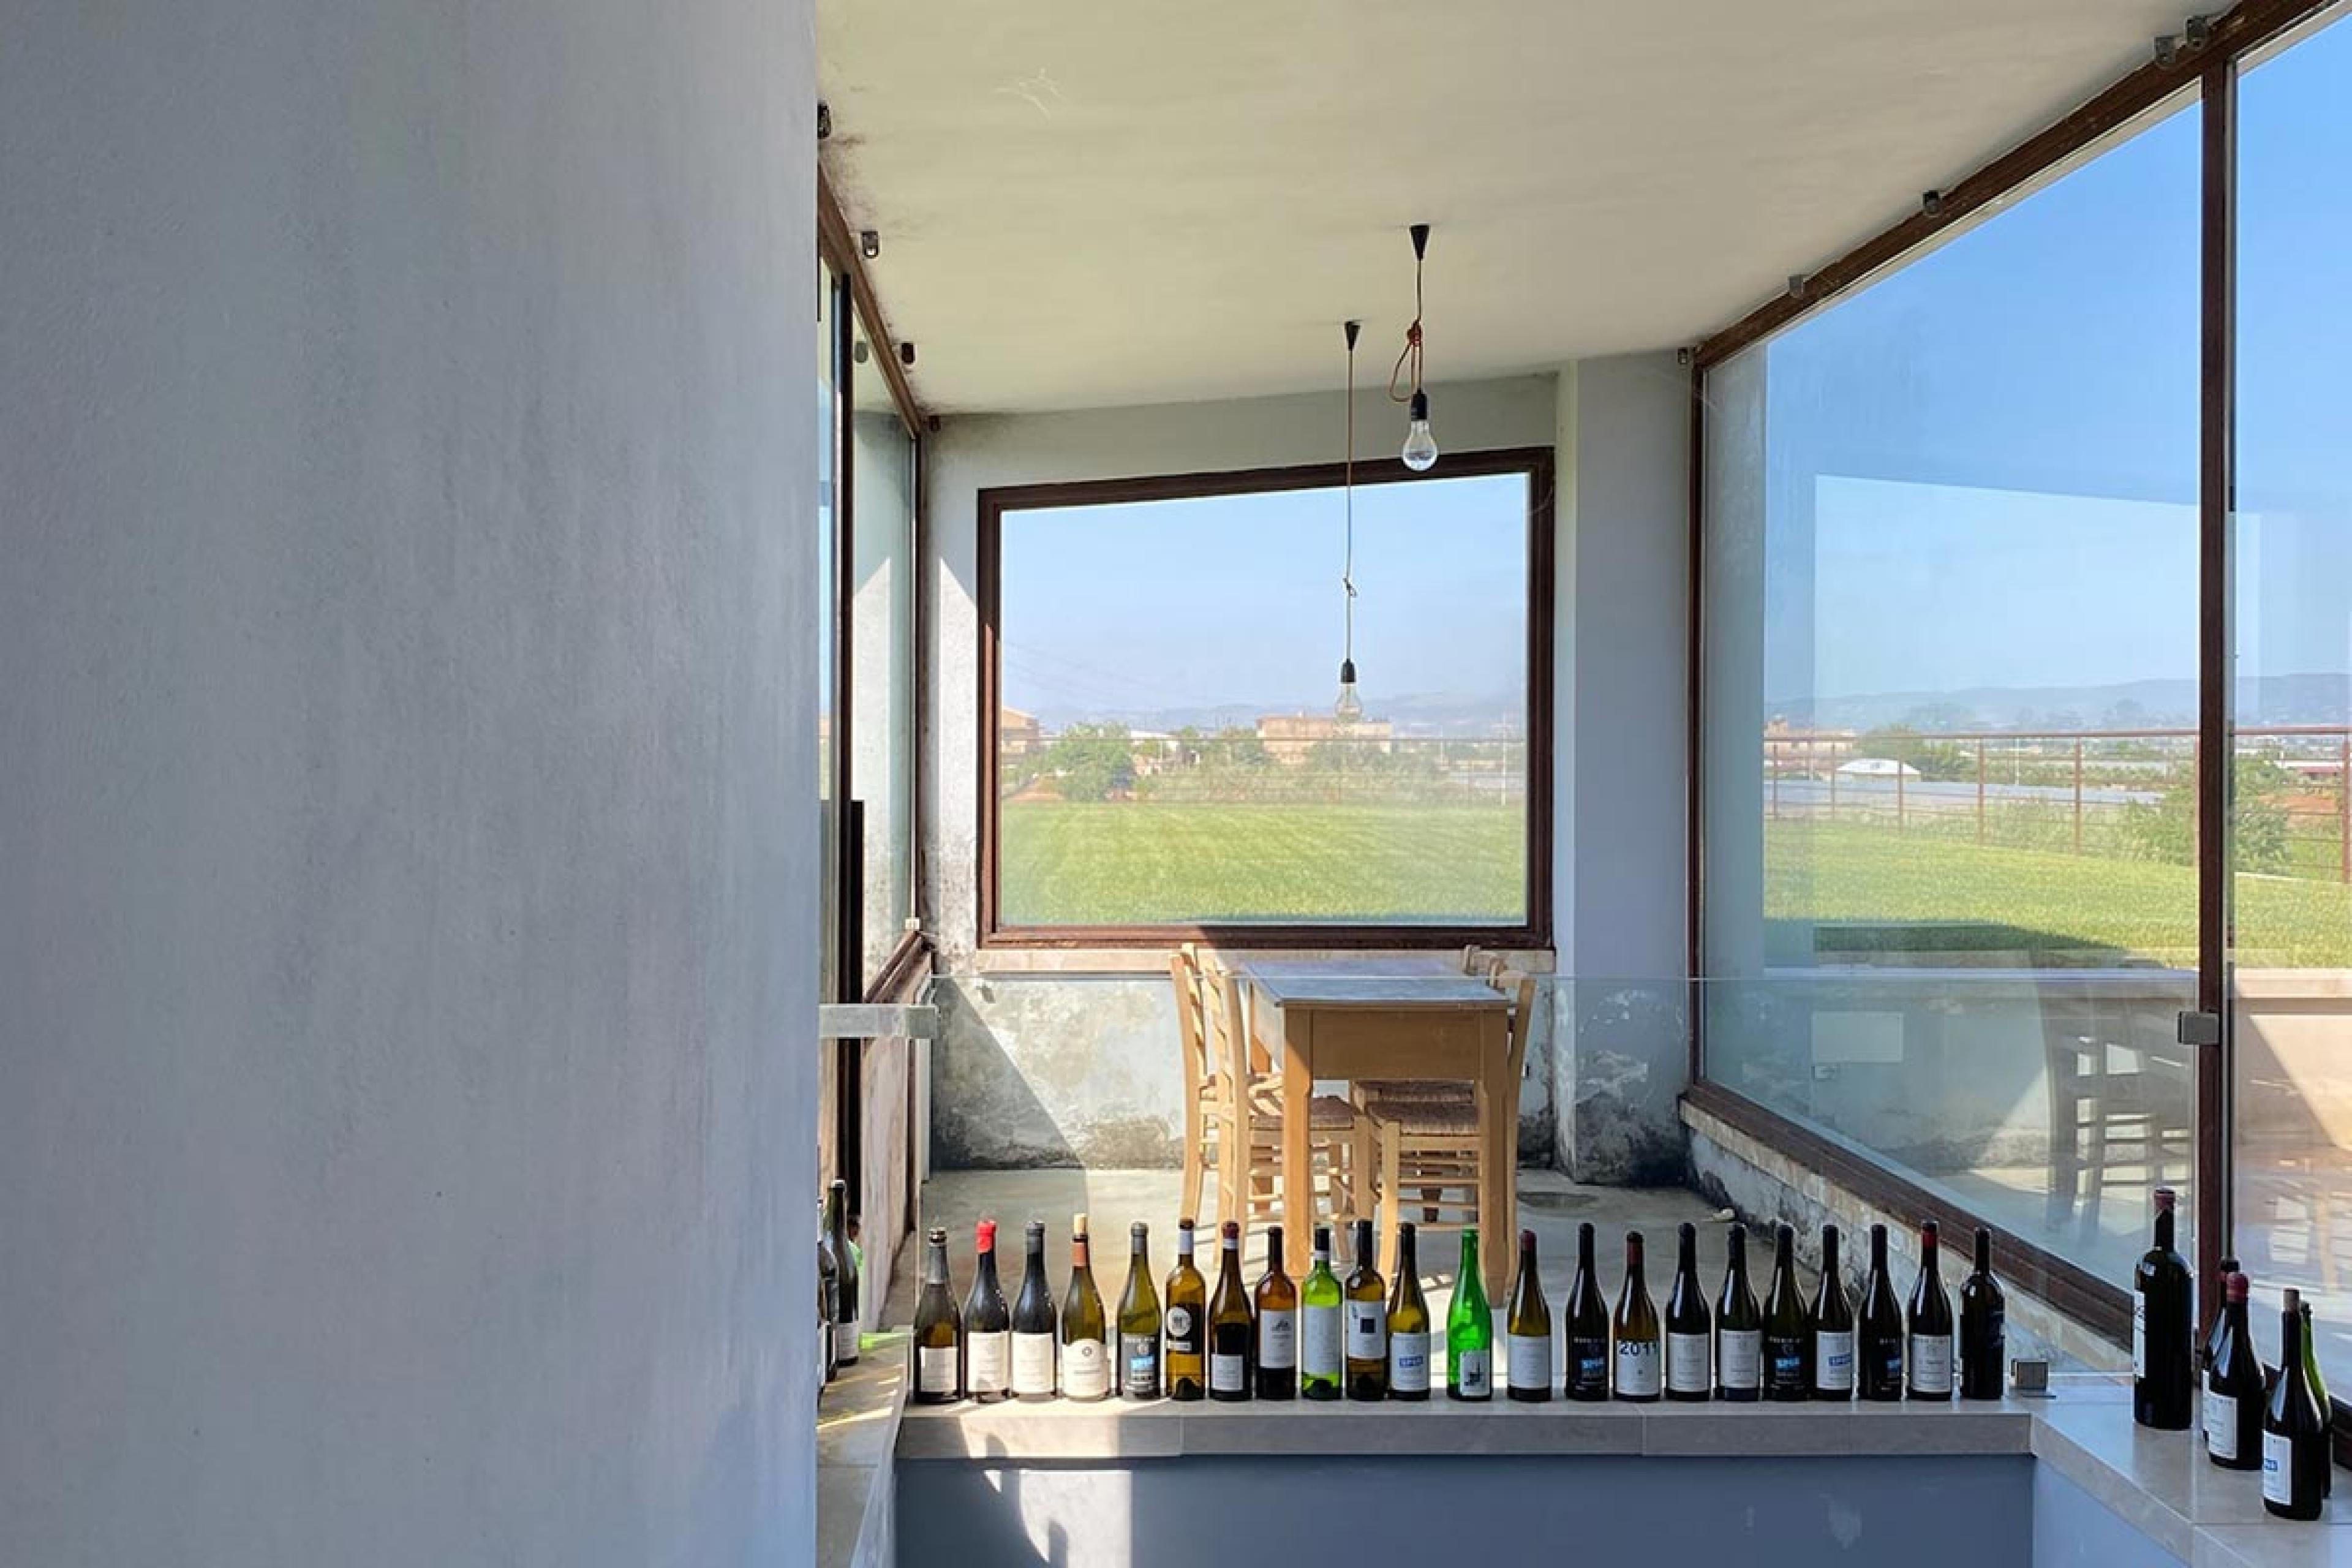 view from inside contemporary white building with wine bottles on shelf and windows looking to greenery outside